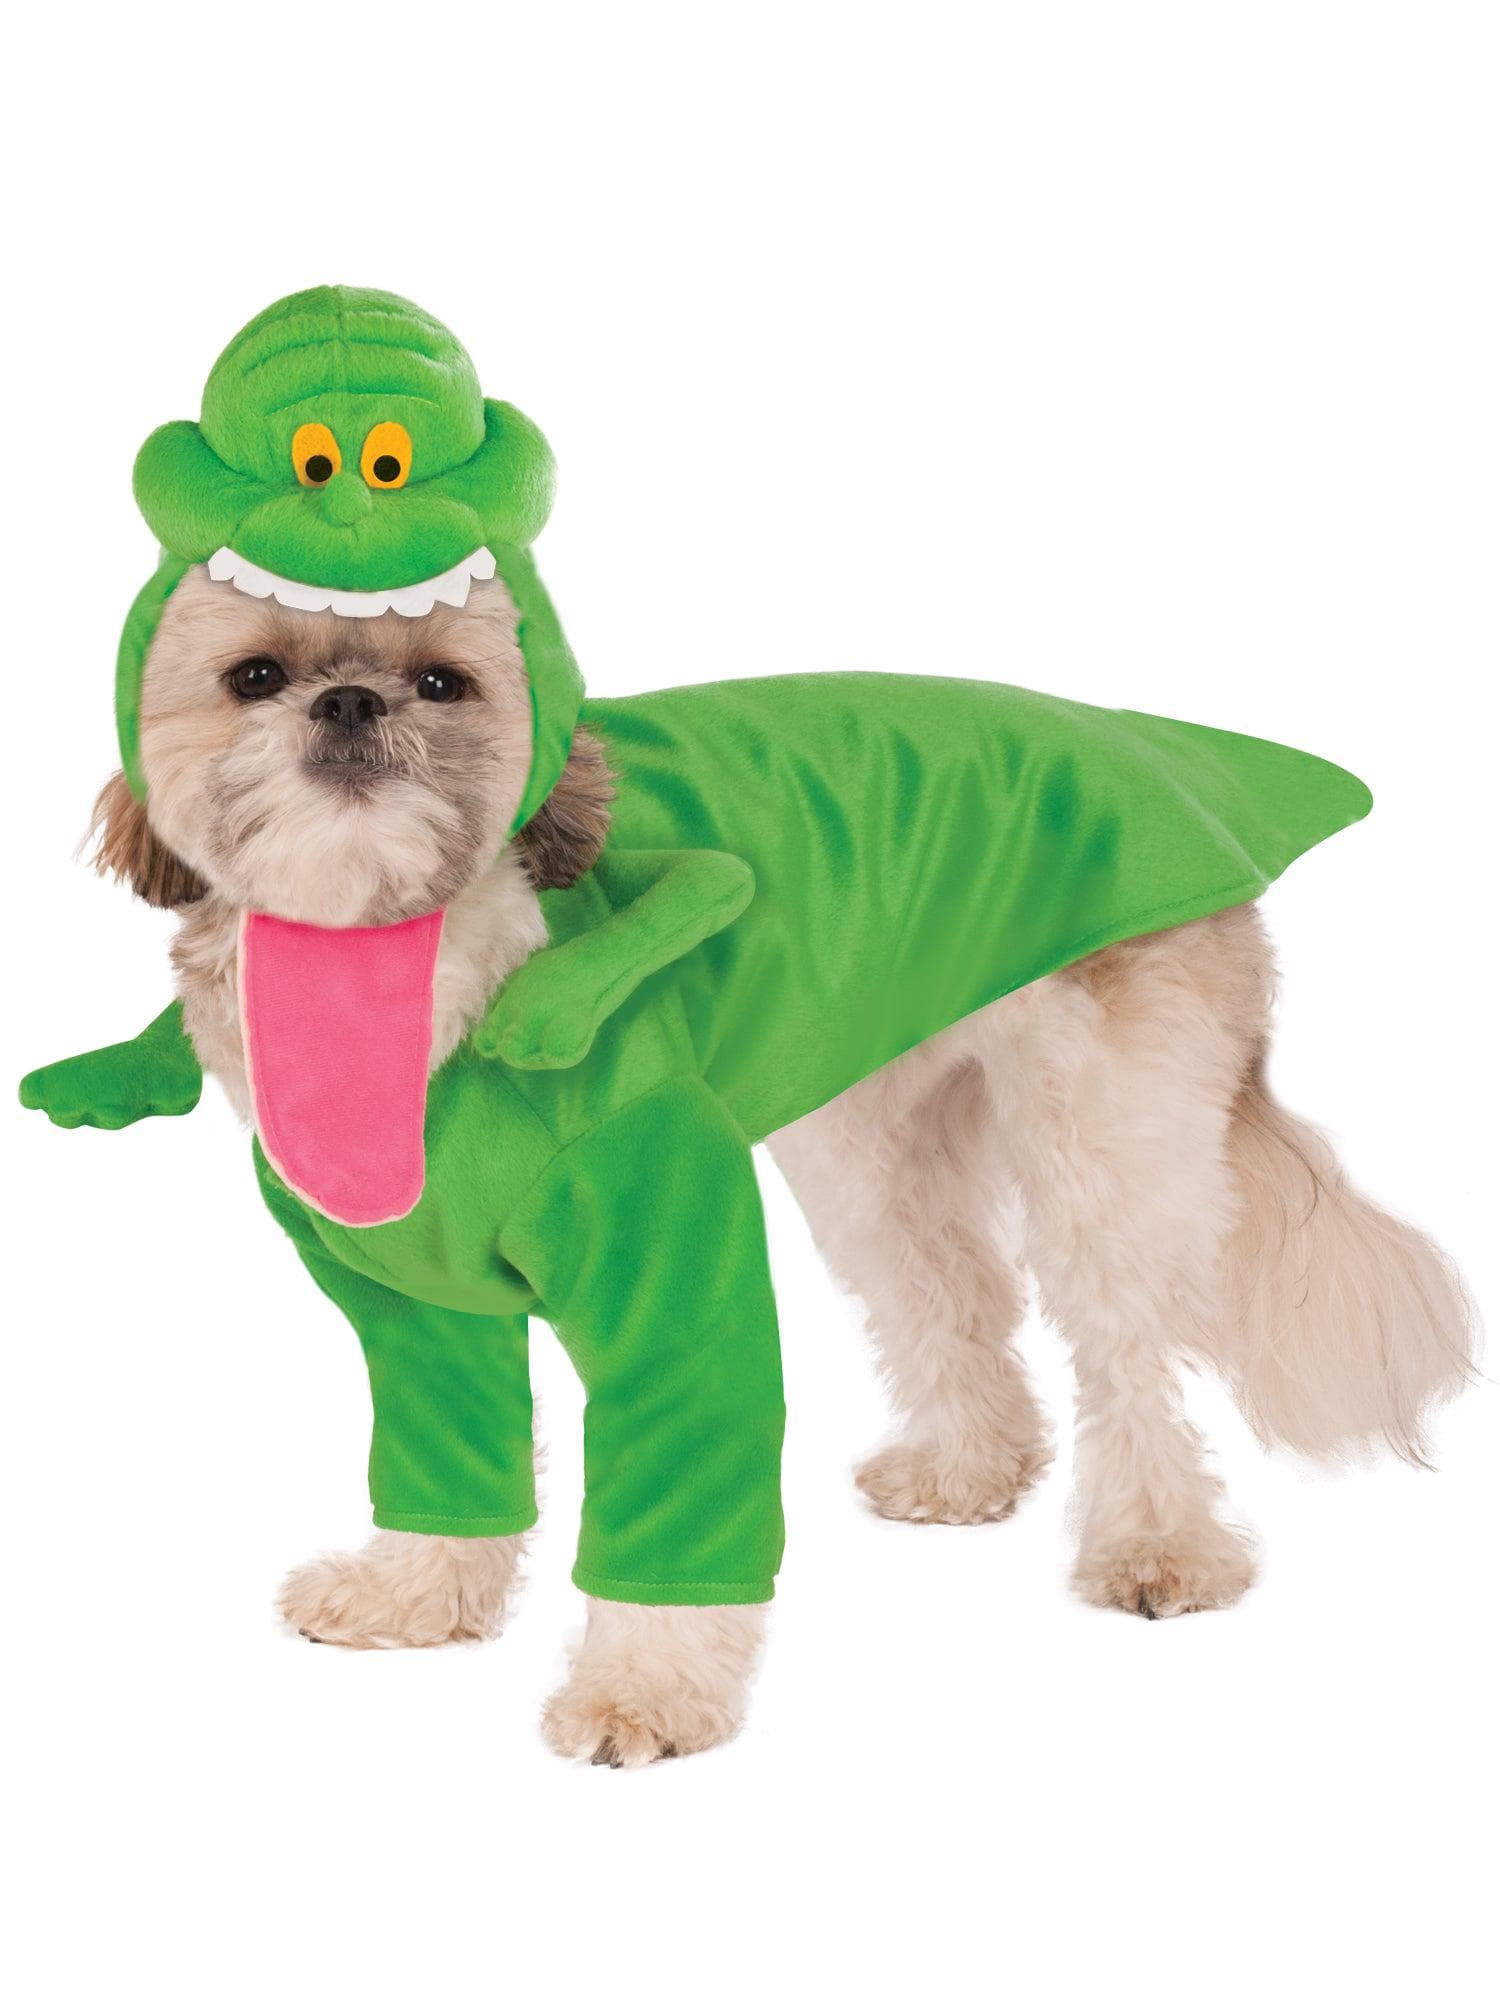 Ghostbusters Slimer Pet Costume - costumes.com